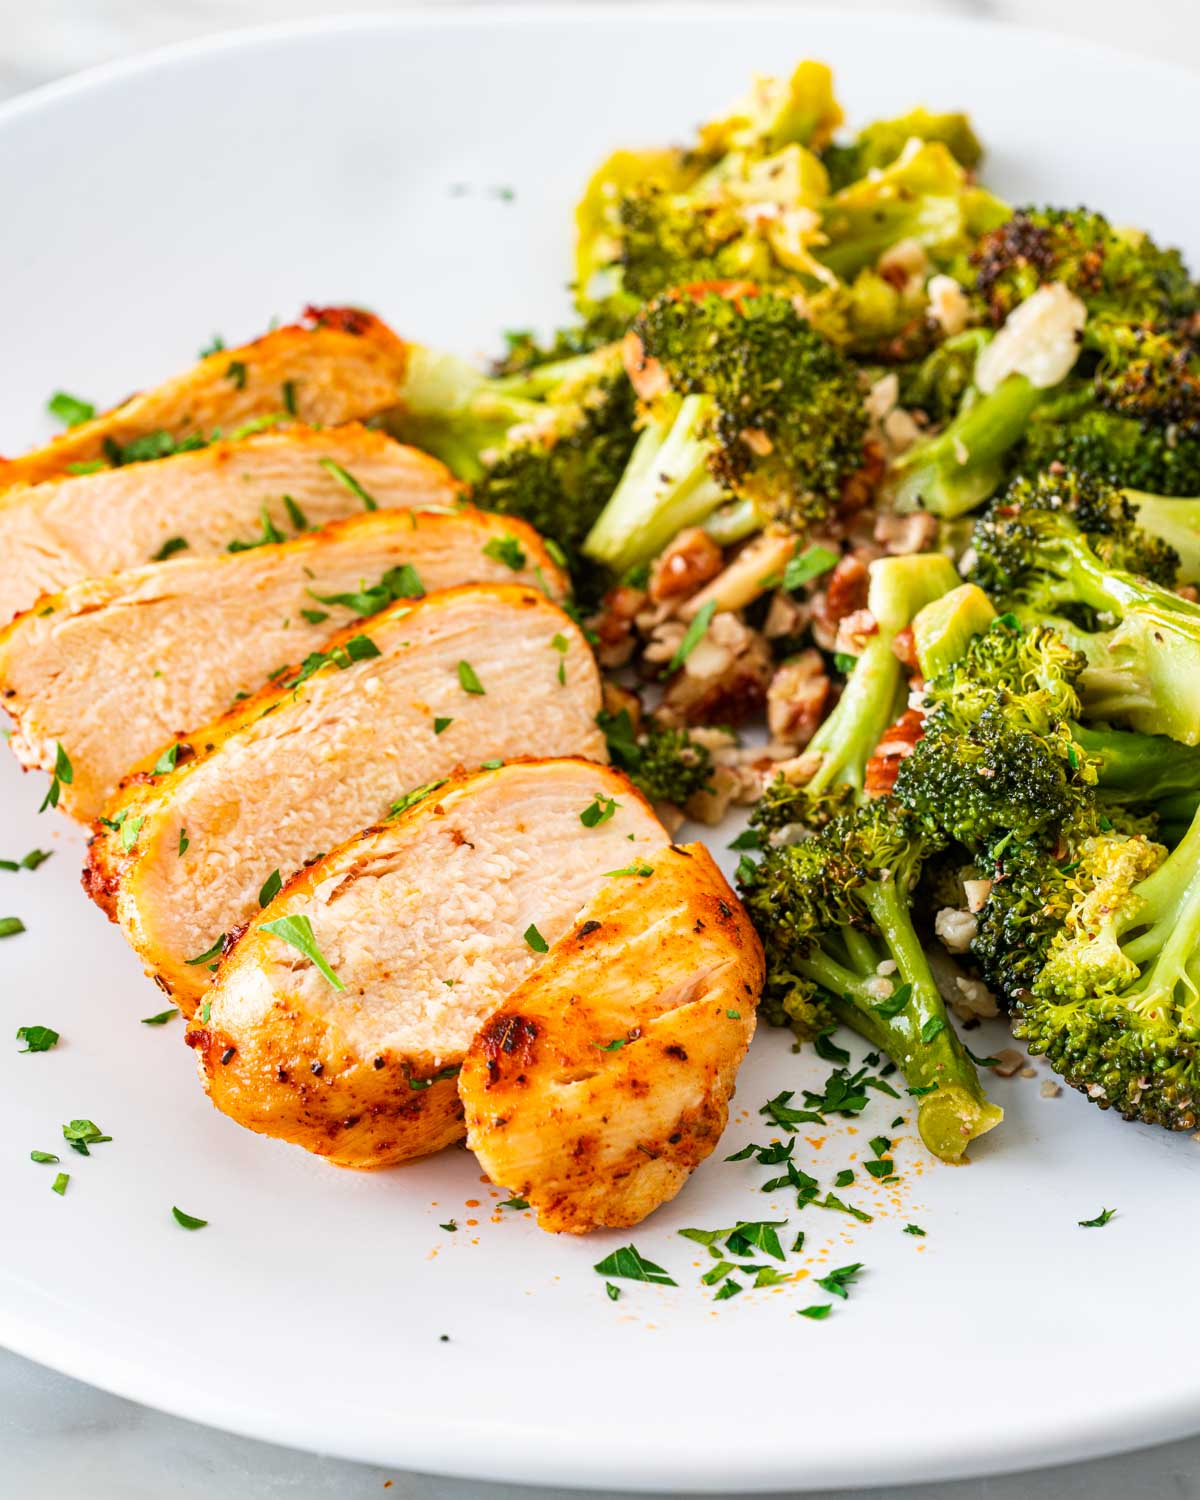 a sliced chicken breast next to roasted broccoli on a white plate.